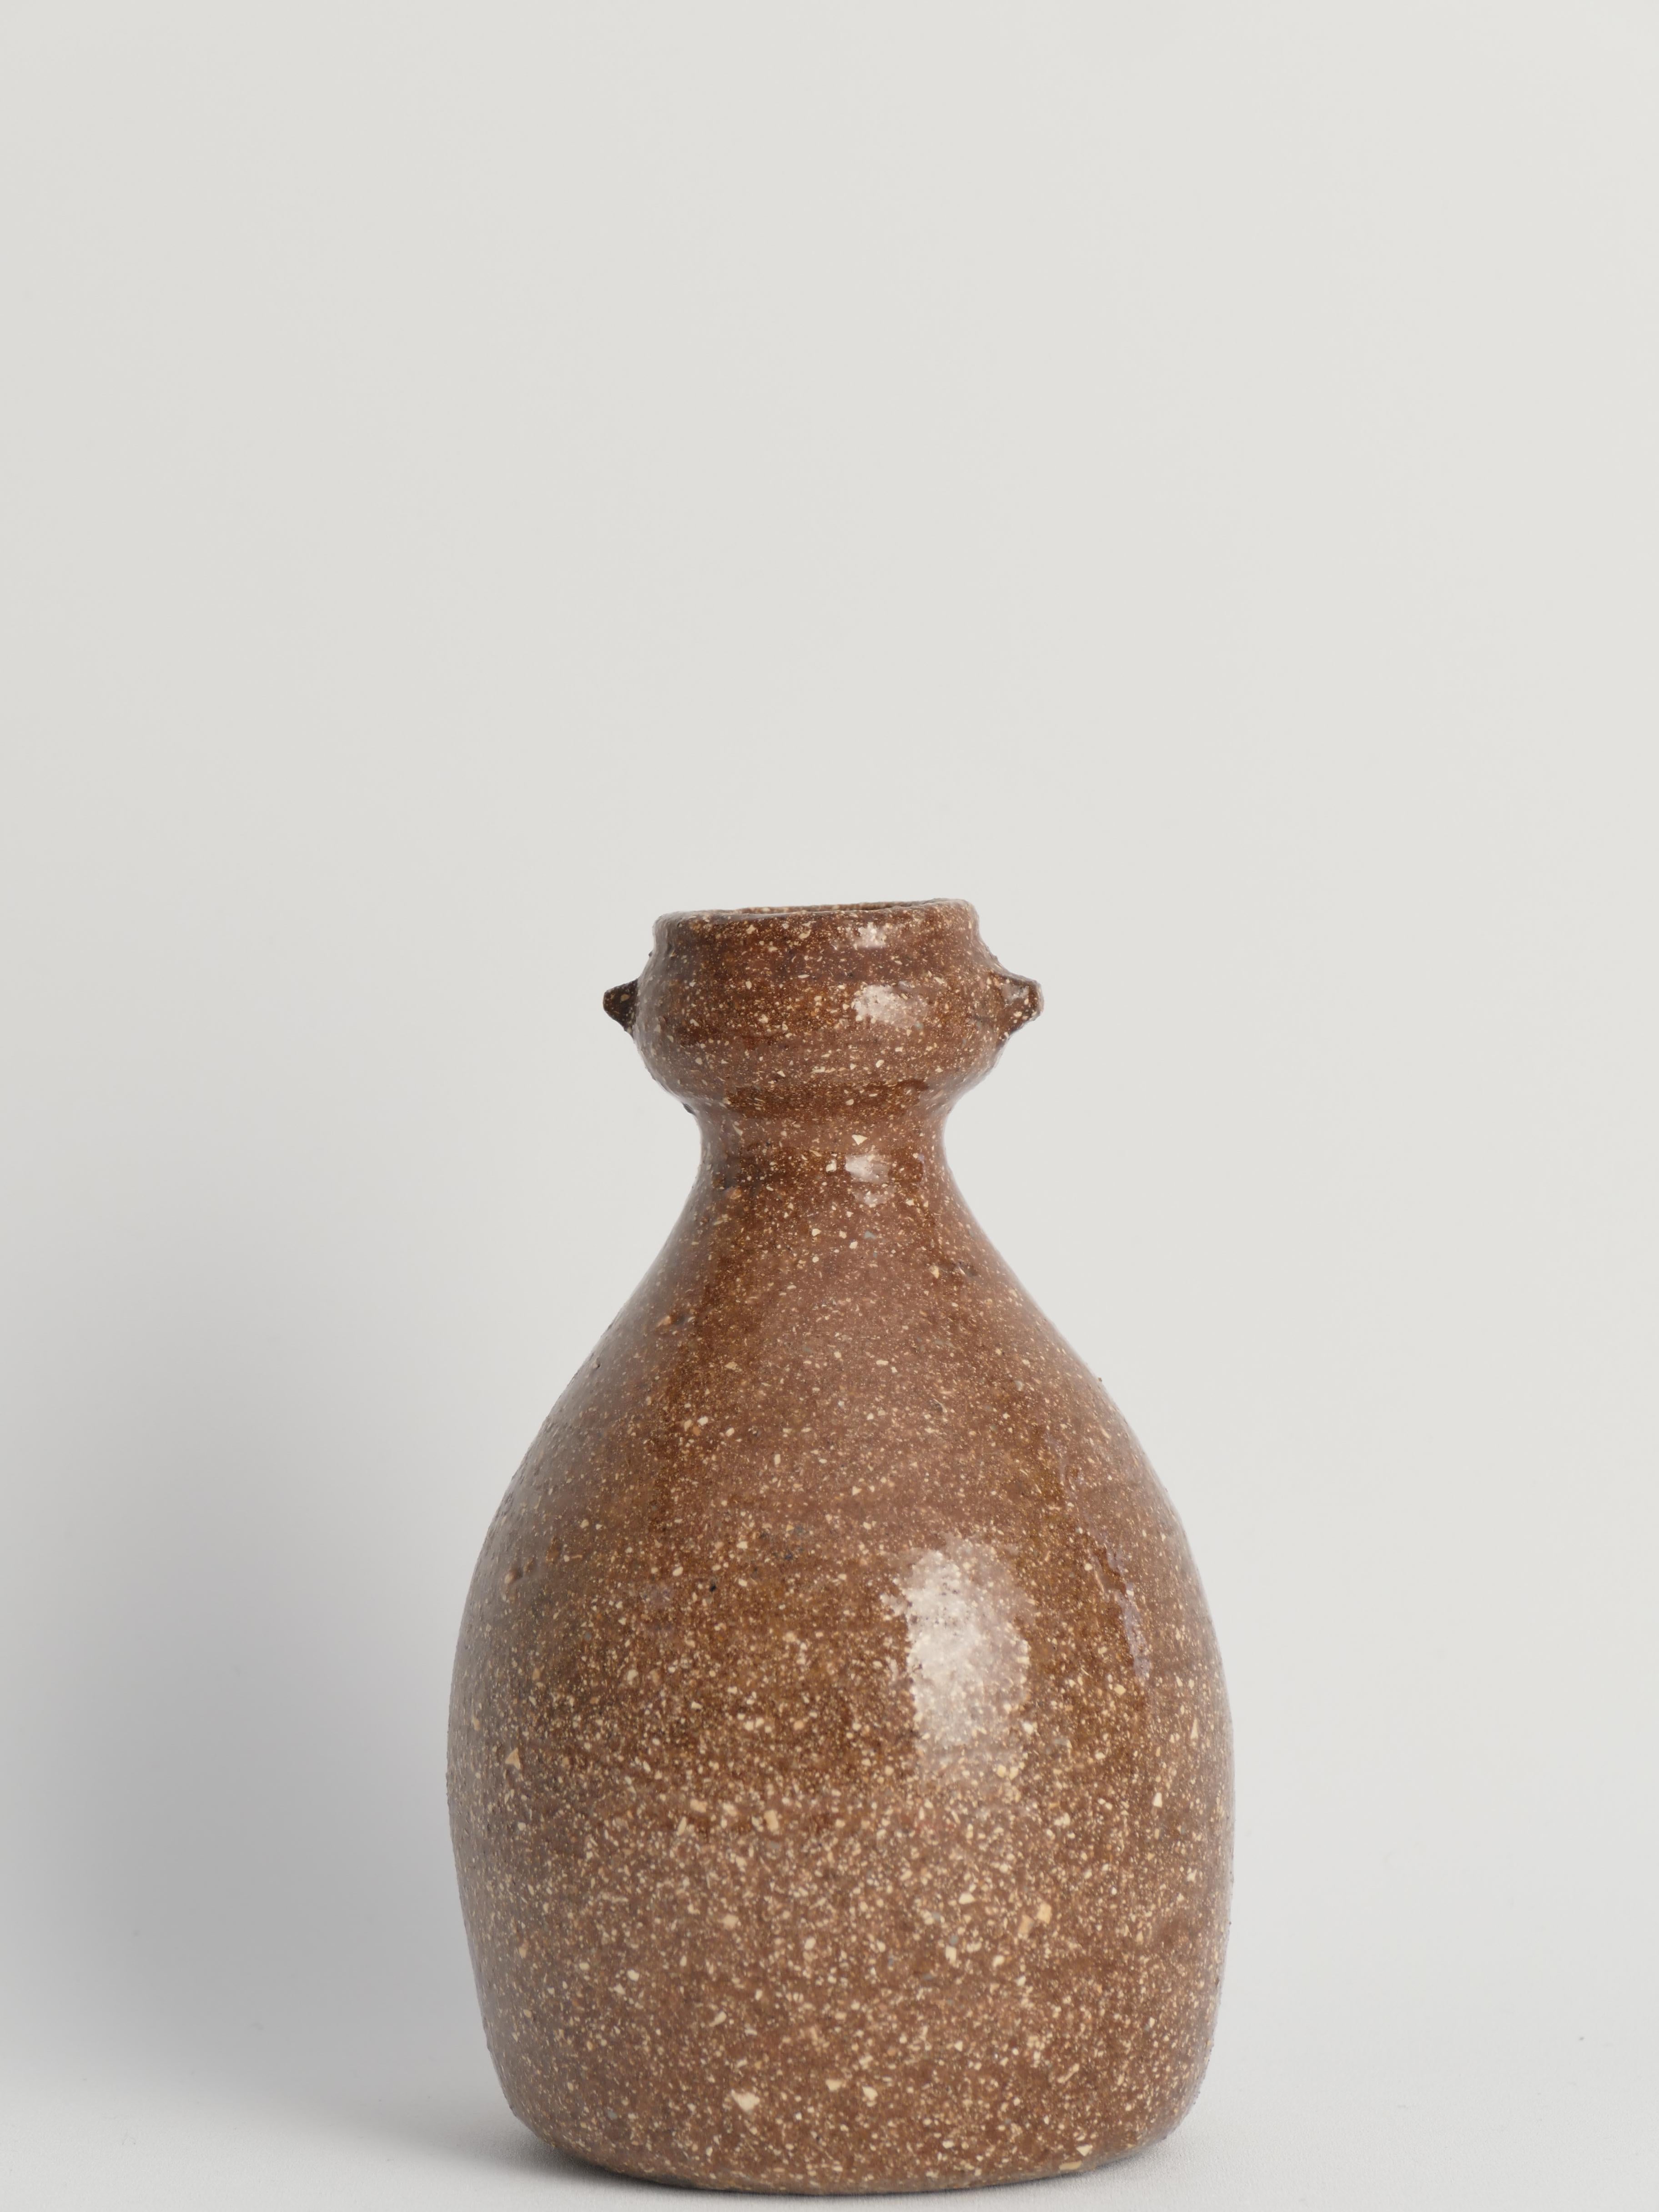 Unknown Japanese Shigaraki Inspired Handmade Stoneware Vase with Barnacle-Like Texture For Sale